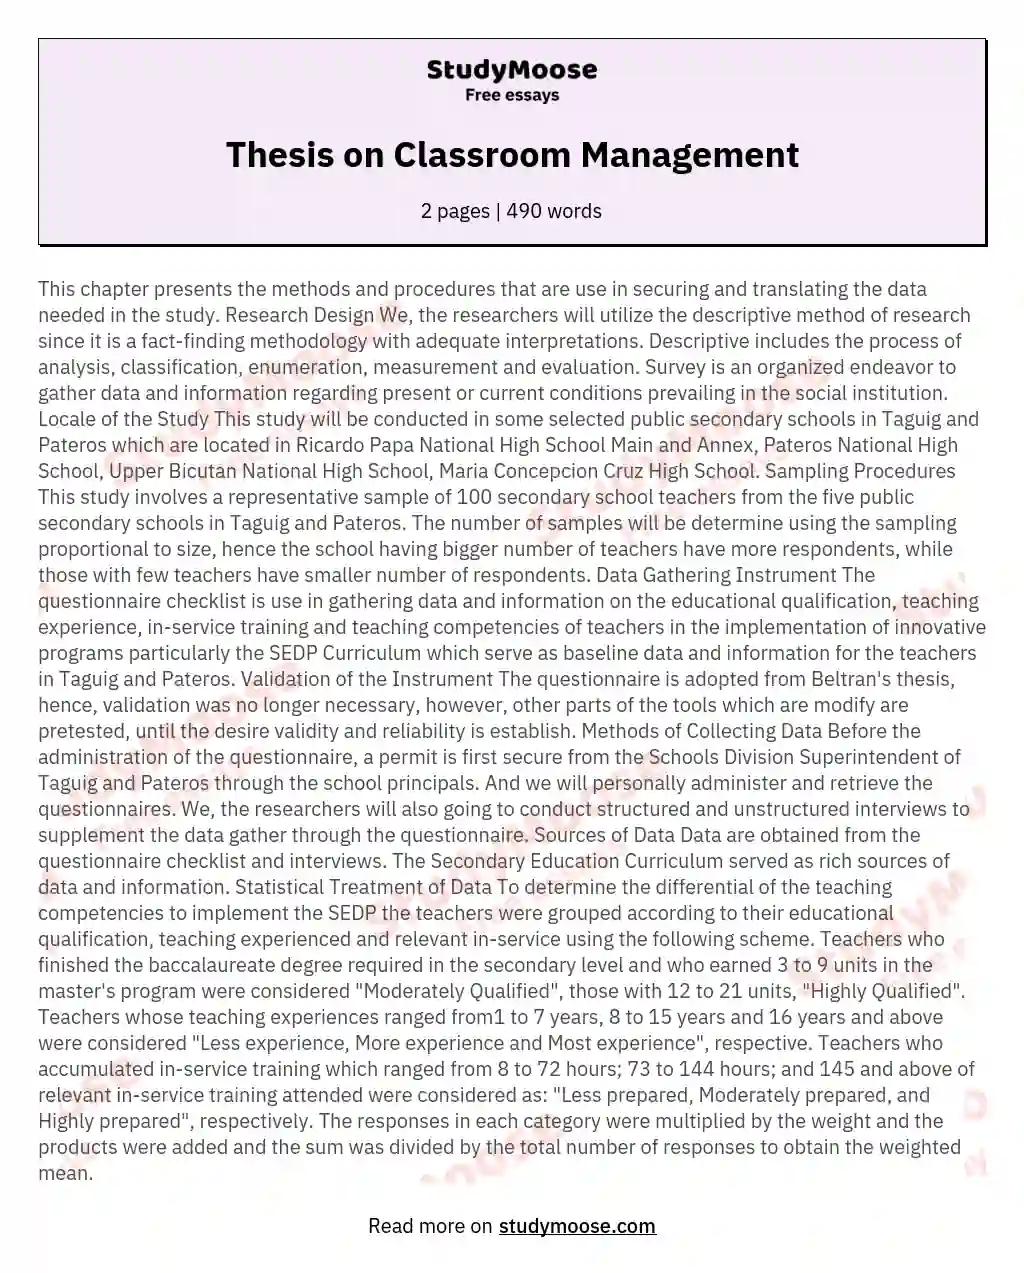 Thesis on Classroom Management essay